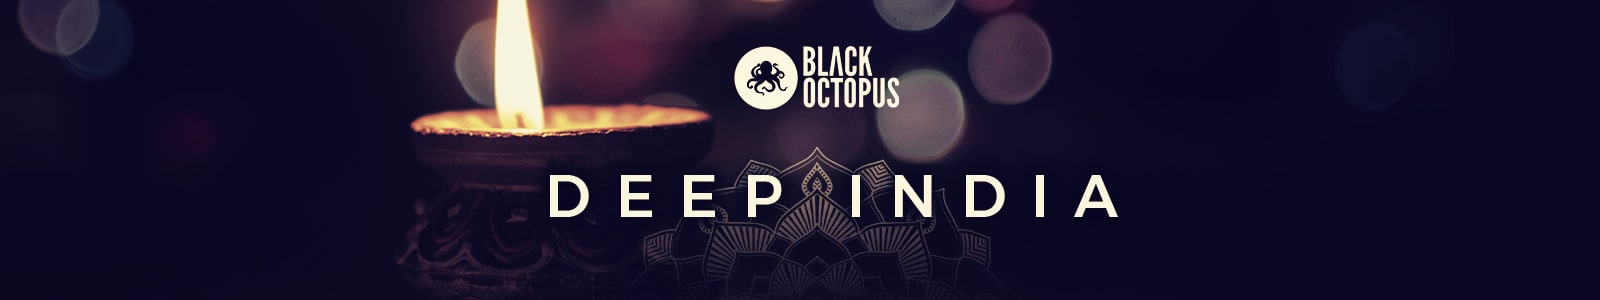 deep india by black octopus